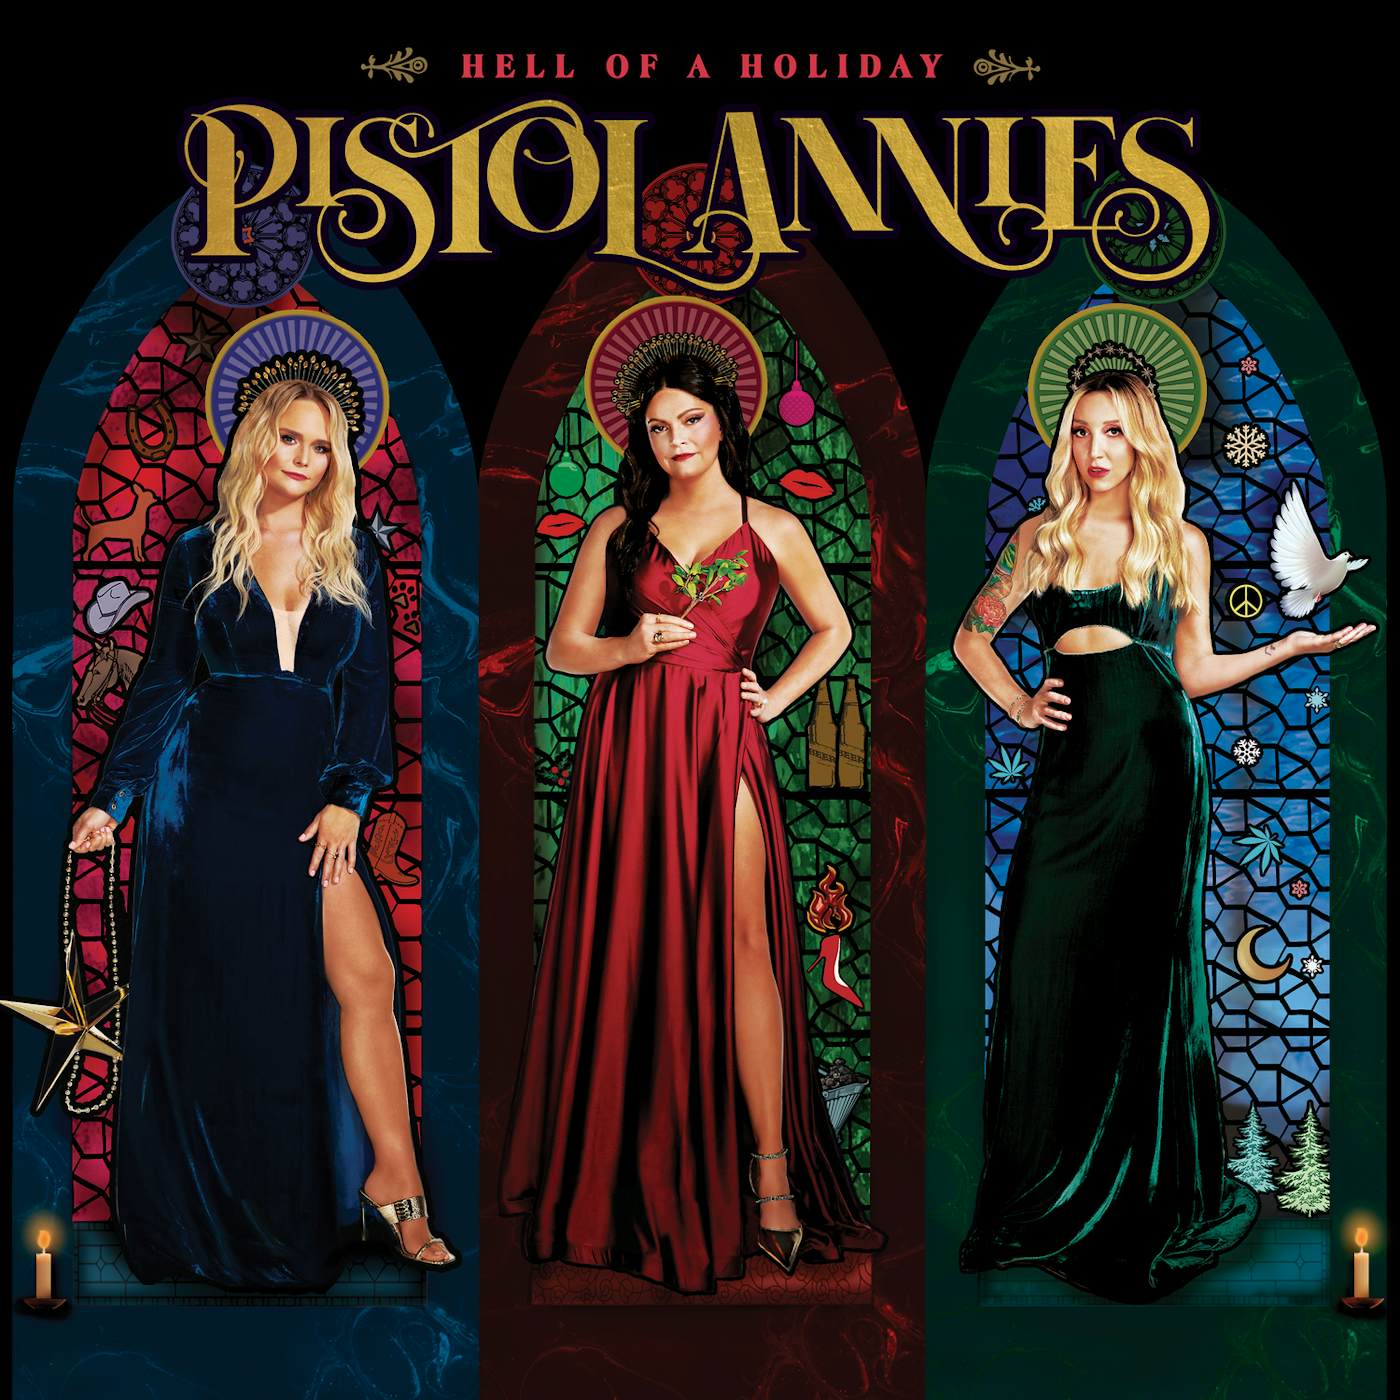 Pistol Annies HELL OF A HOLIDAY CD